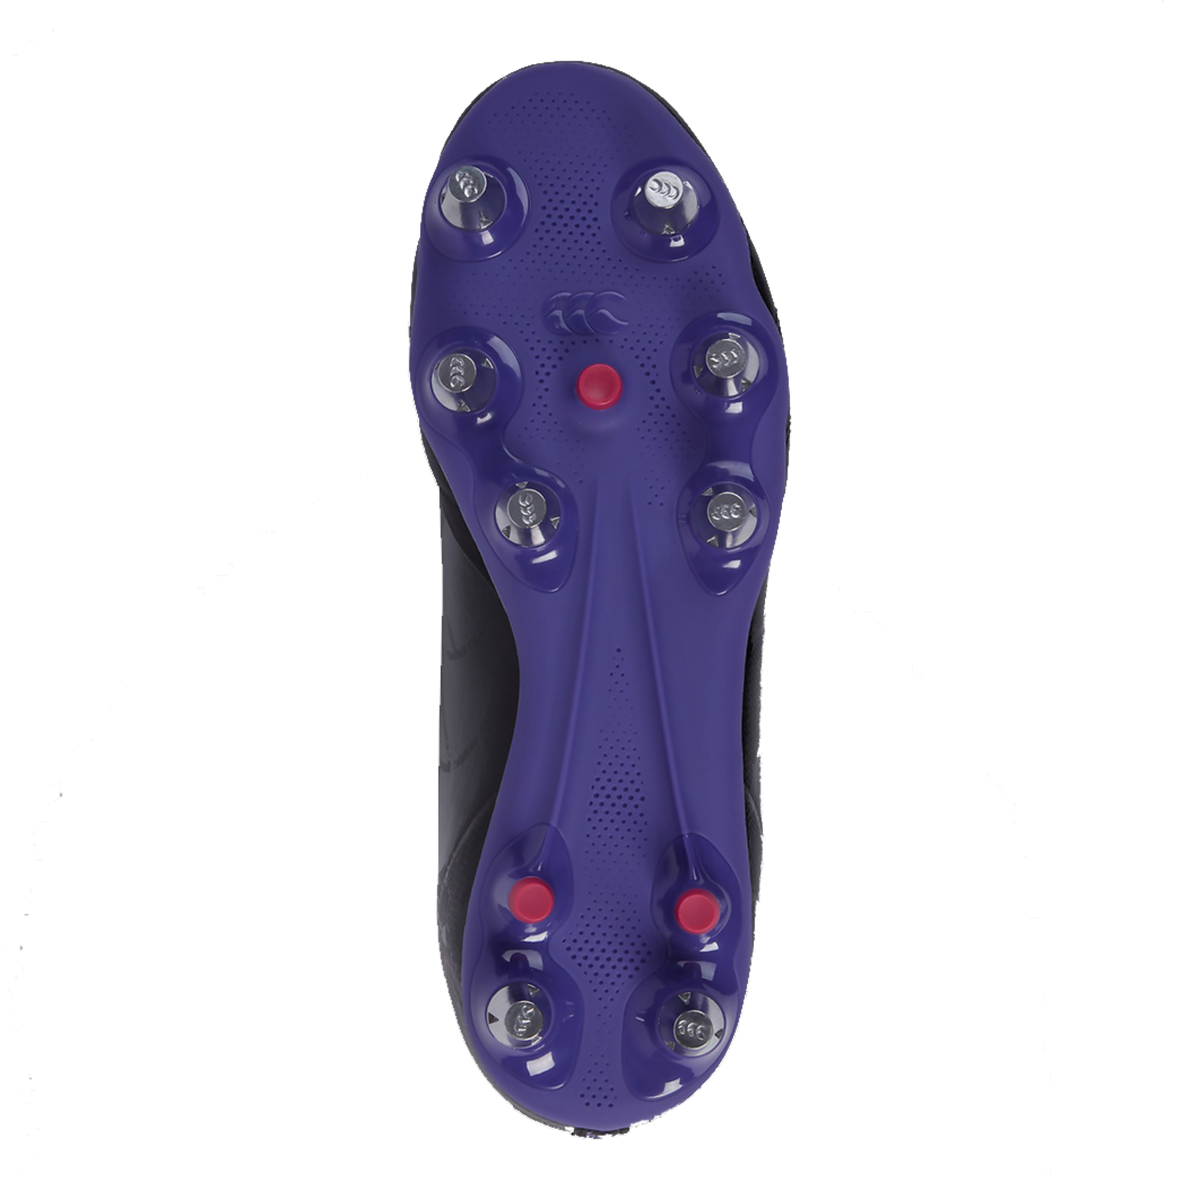 Canterbury Stampede Pro SG Rugby Boots a High-Performance Long Lasting CCC Rugby Studed Shoe Black/Purple Available in Unisex Sizing 6-16